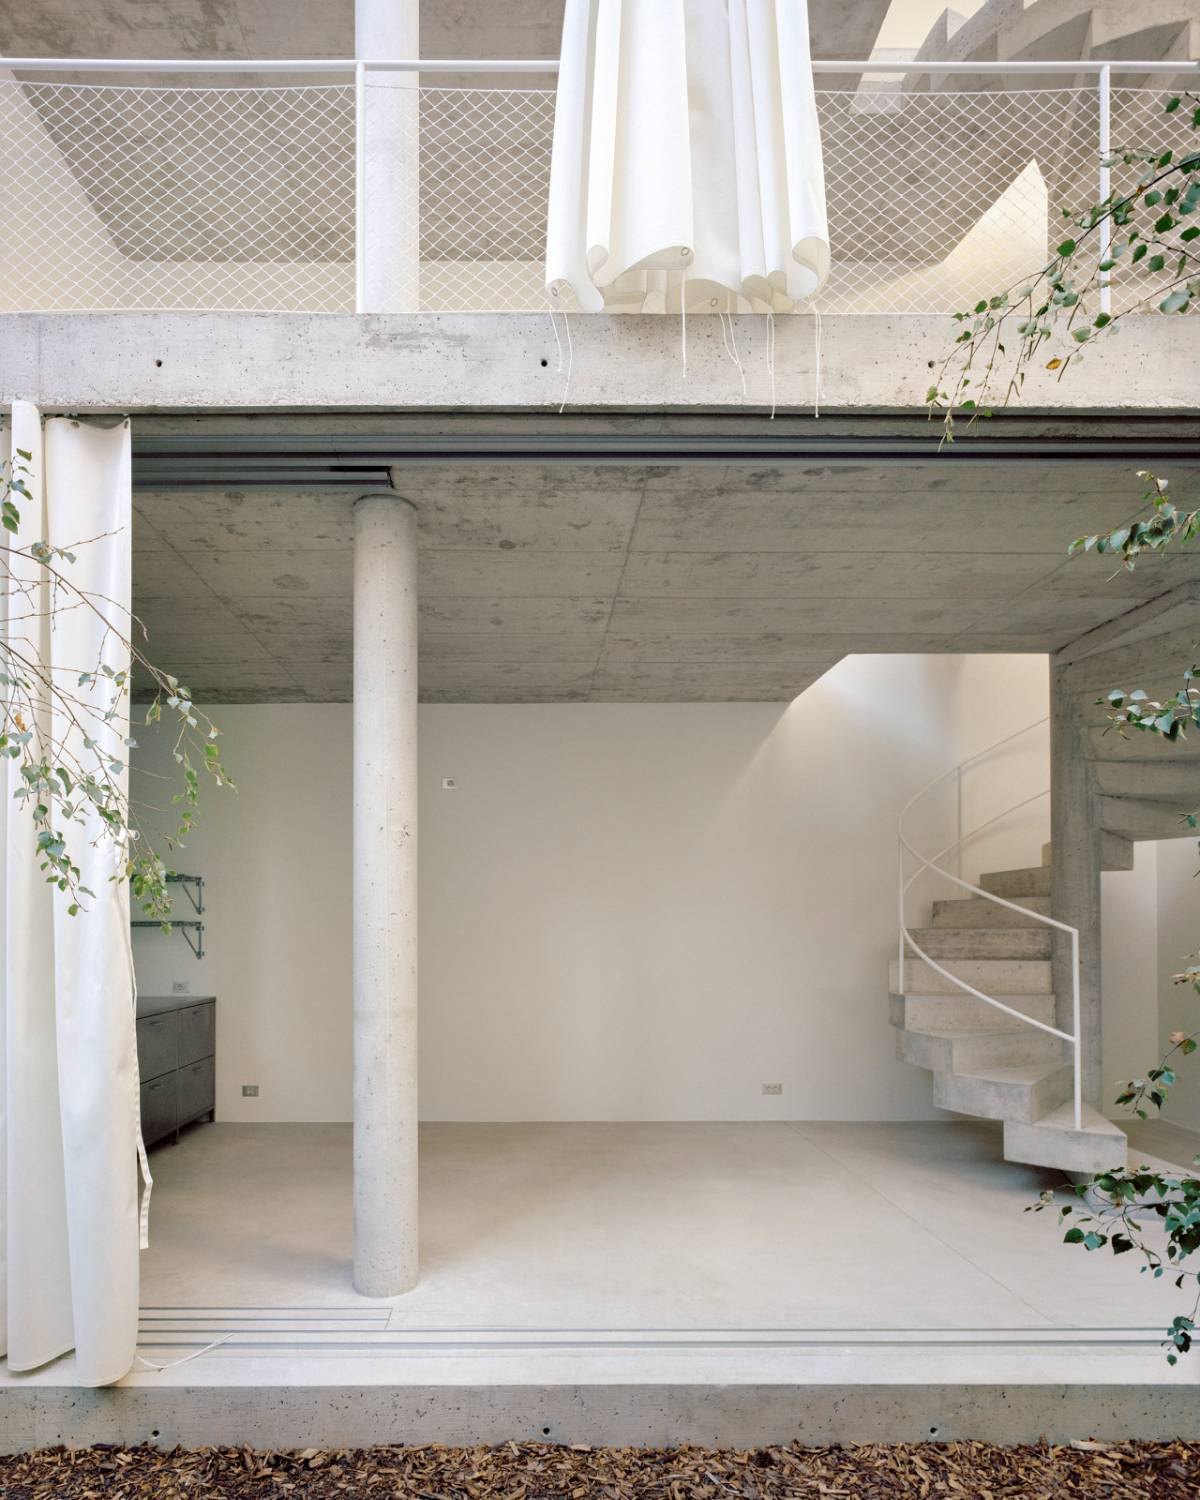 Concrete House with Patio Garden in Barcelona by Arquitectura-G